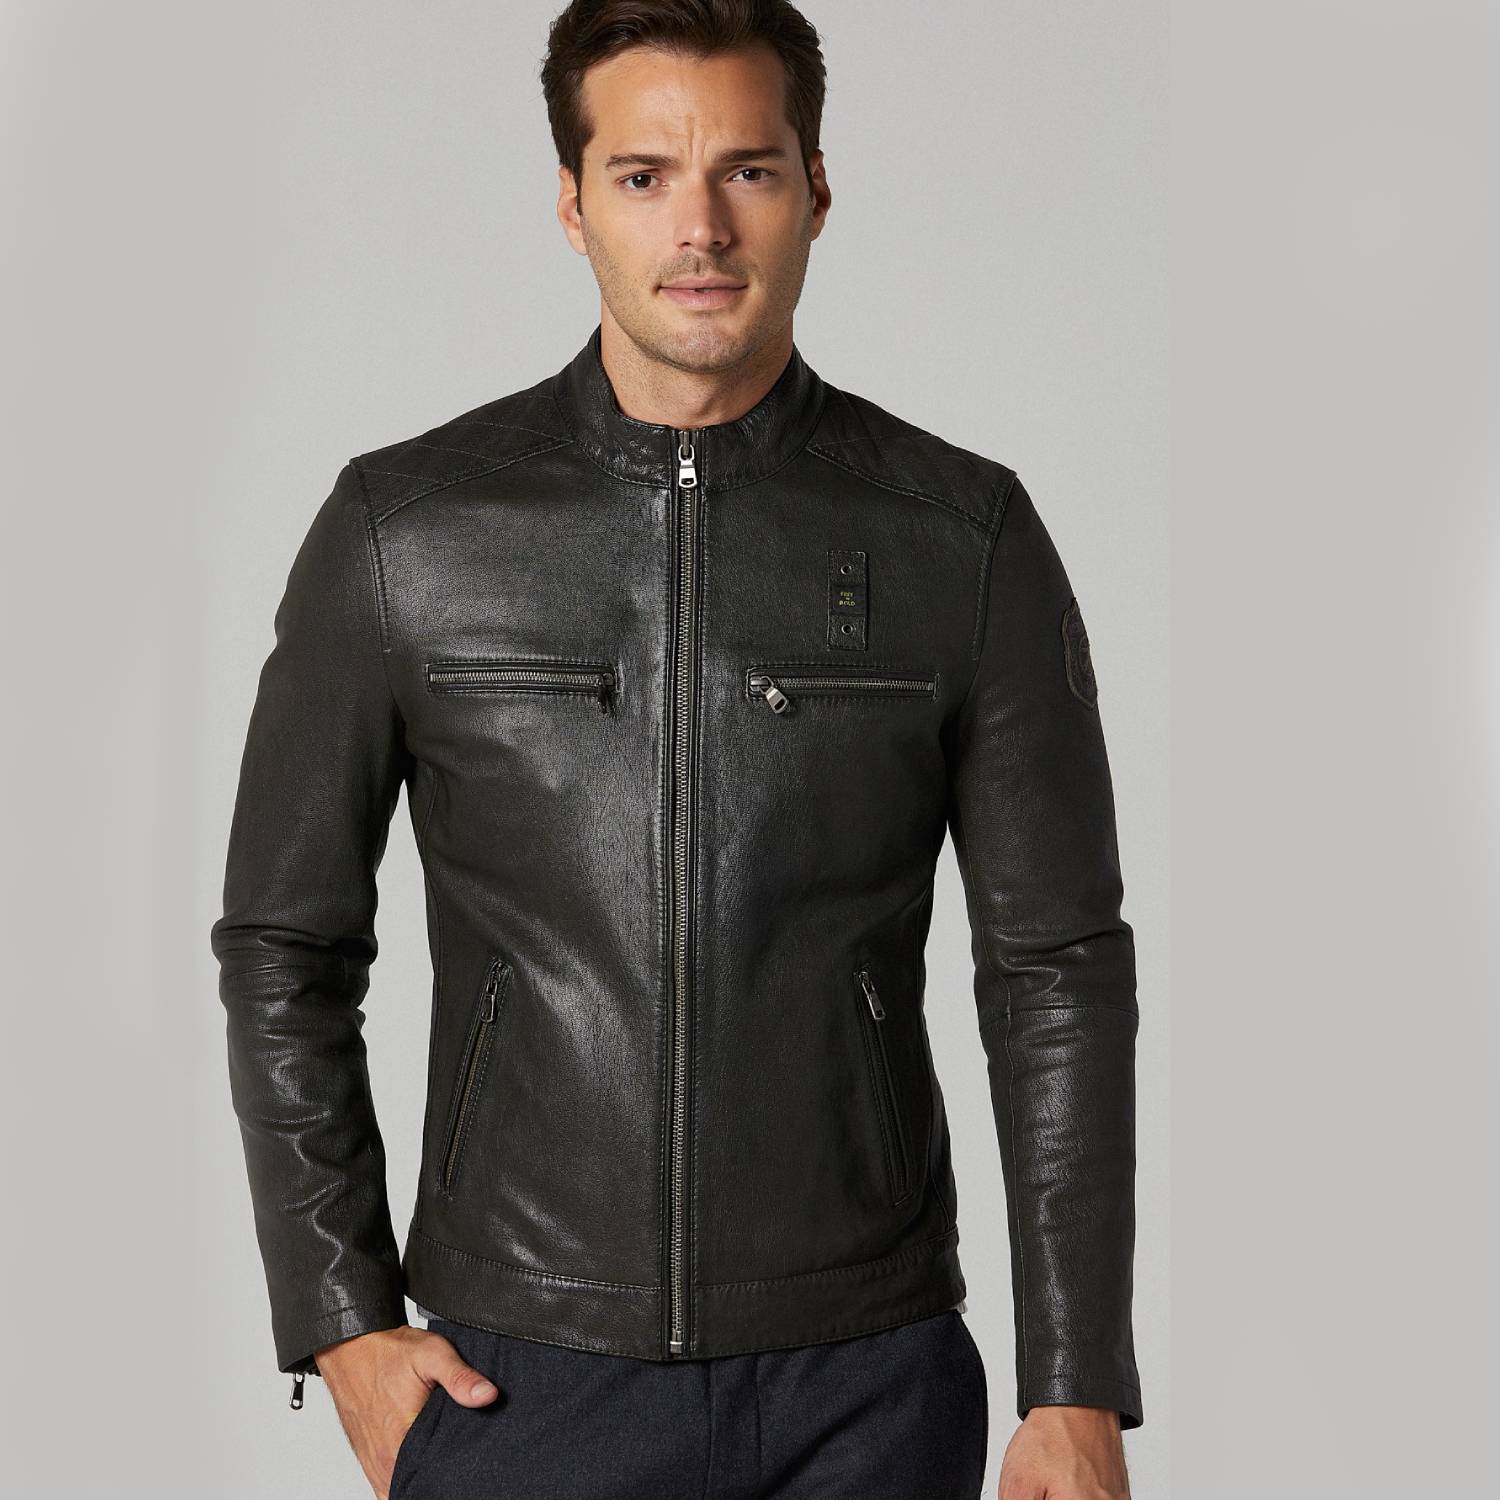 Ionic Black Leather Jacket in USA